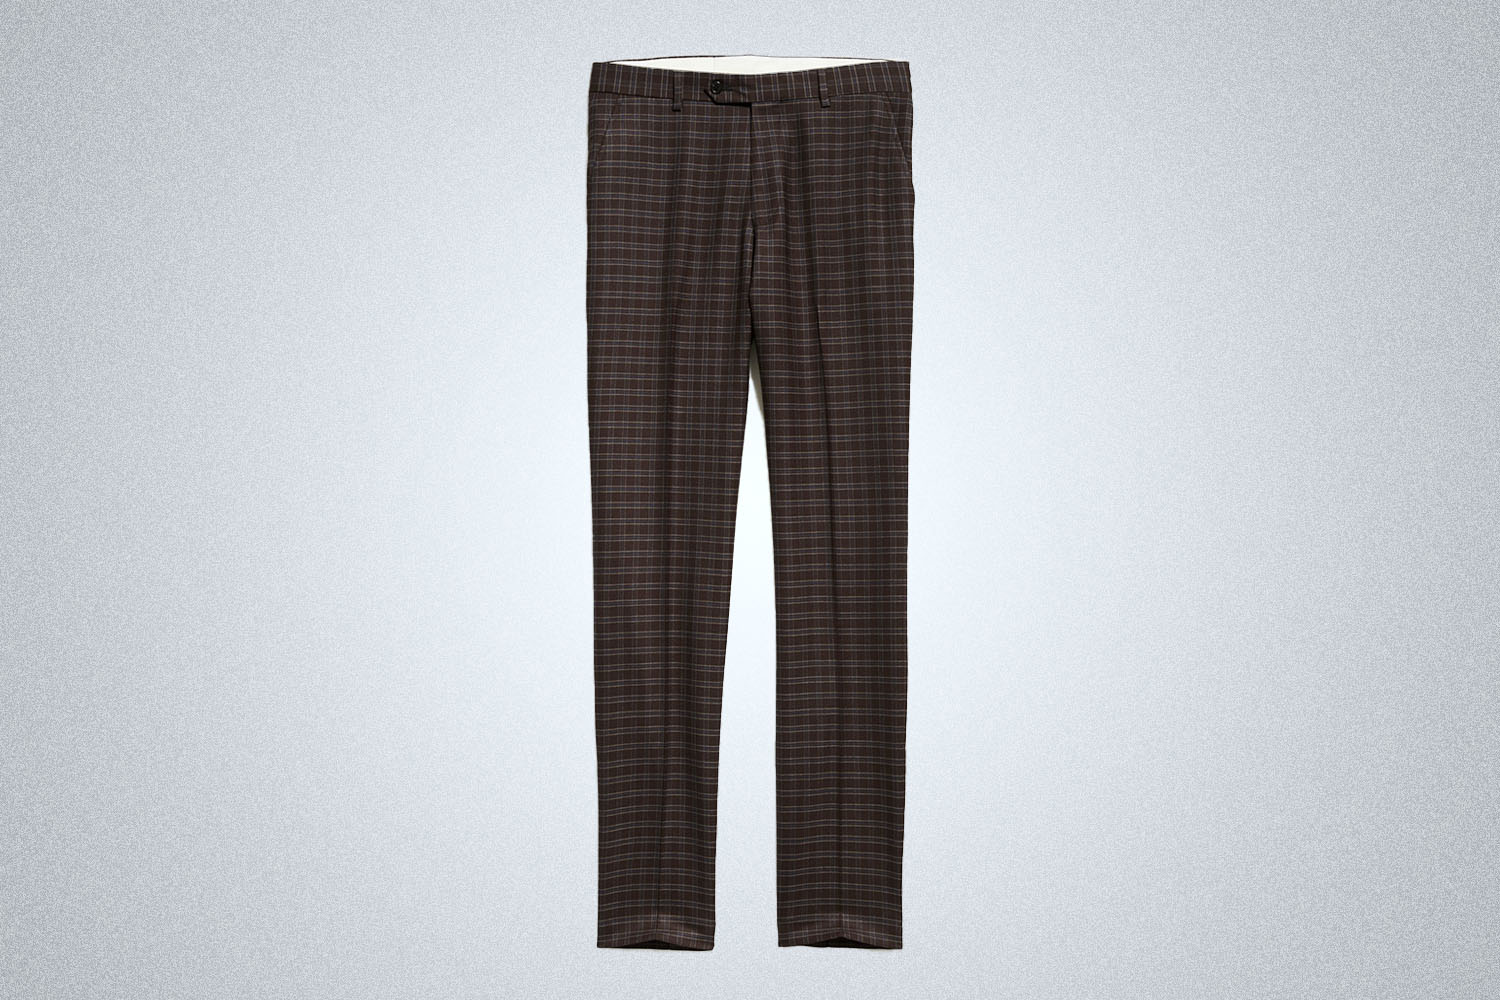 a pair of brown checked dress pants